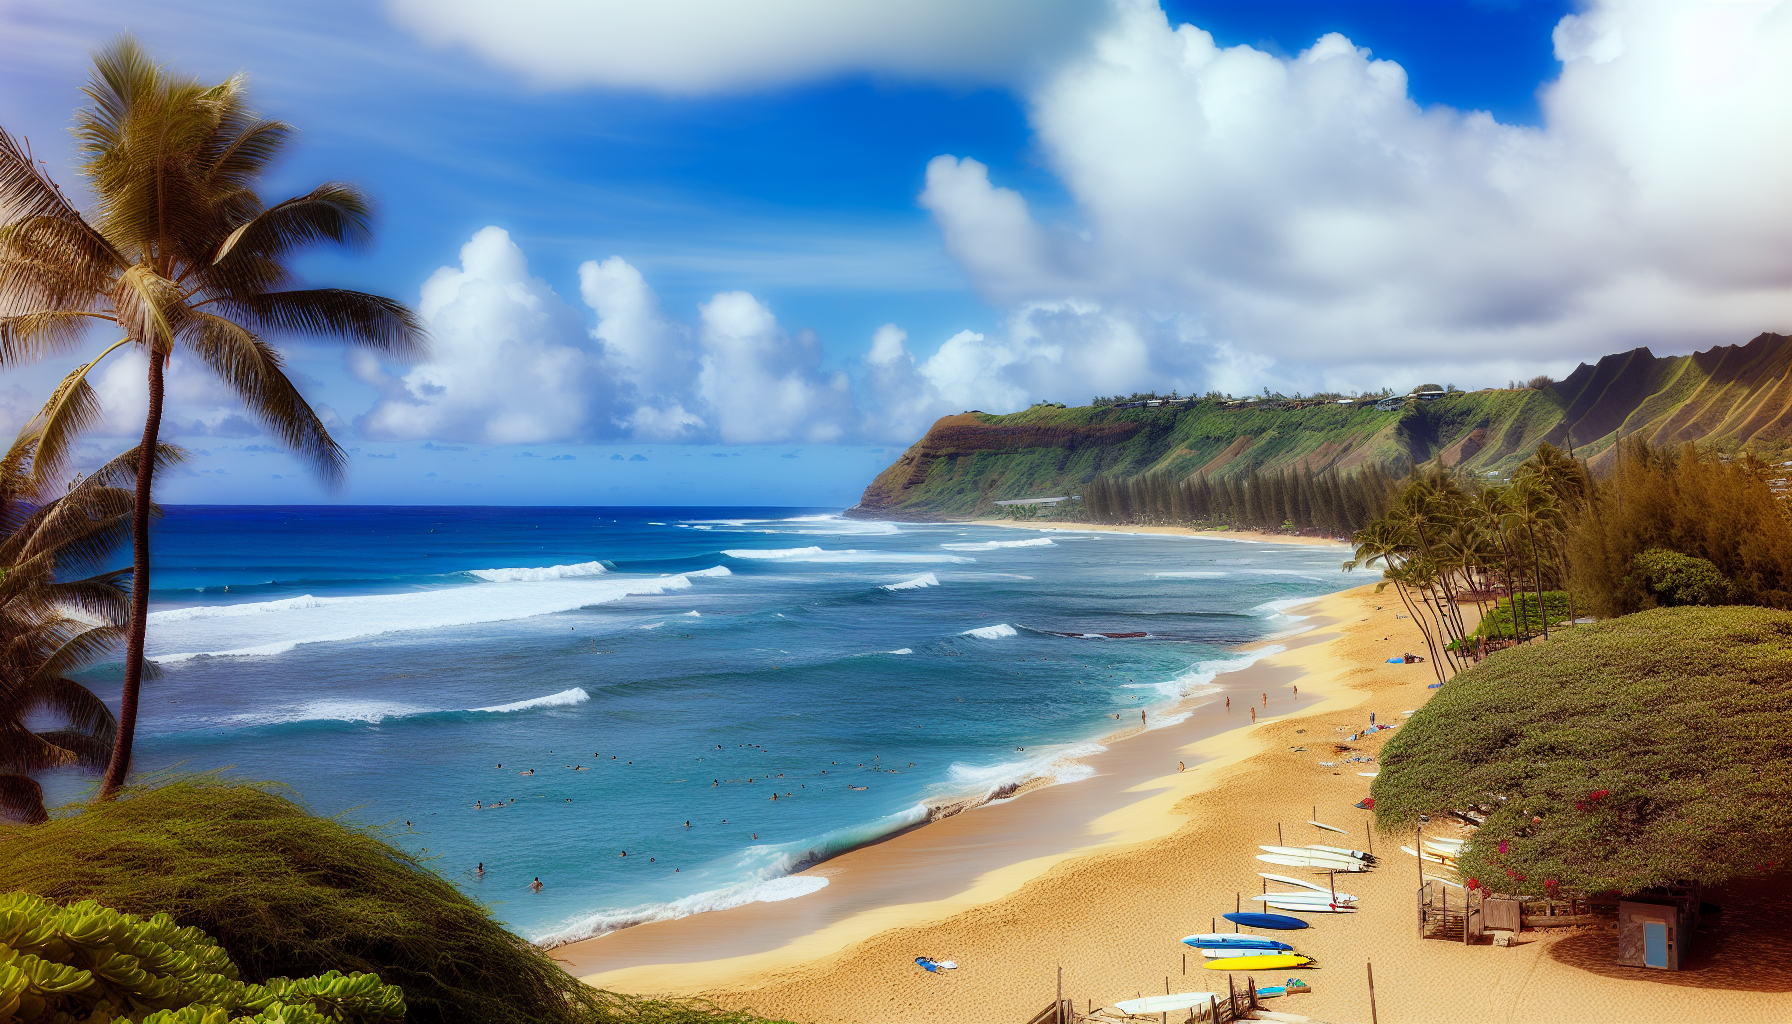 Oahu's North Shore with famous surfing beaches and picturesque coastline